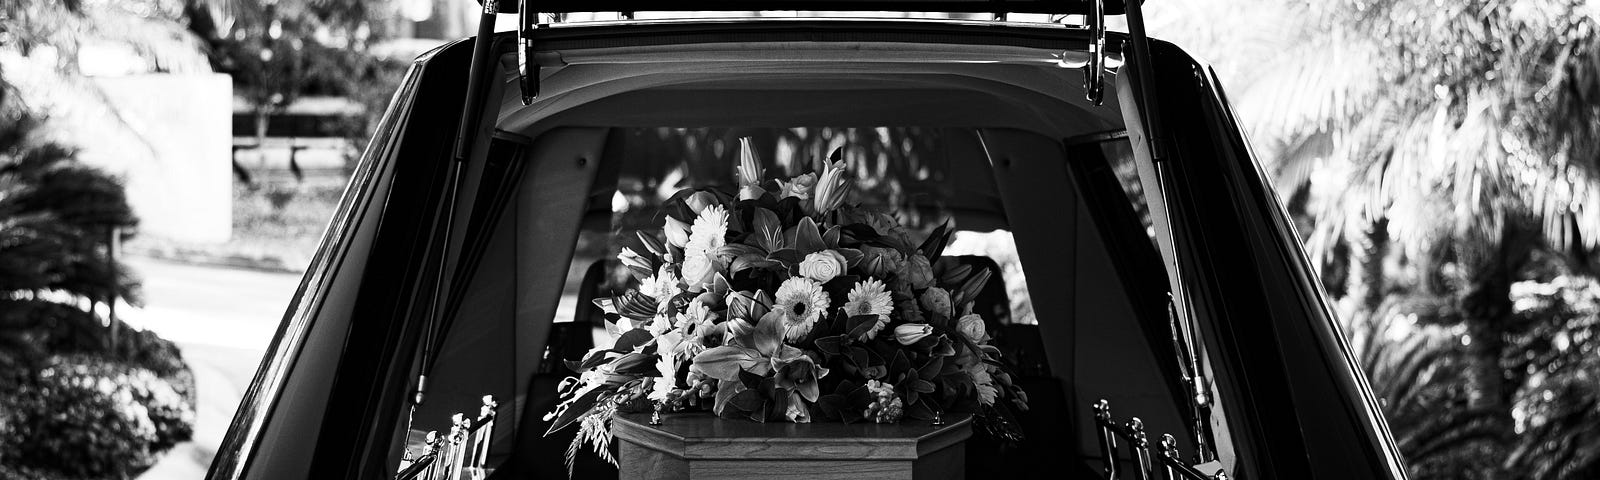 Black and white photo showing a coffin with flowers inside a car.